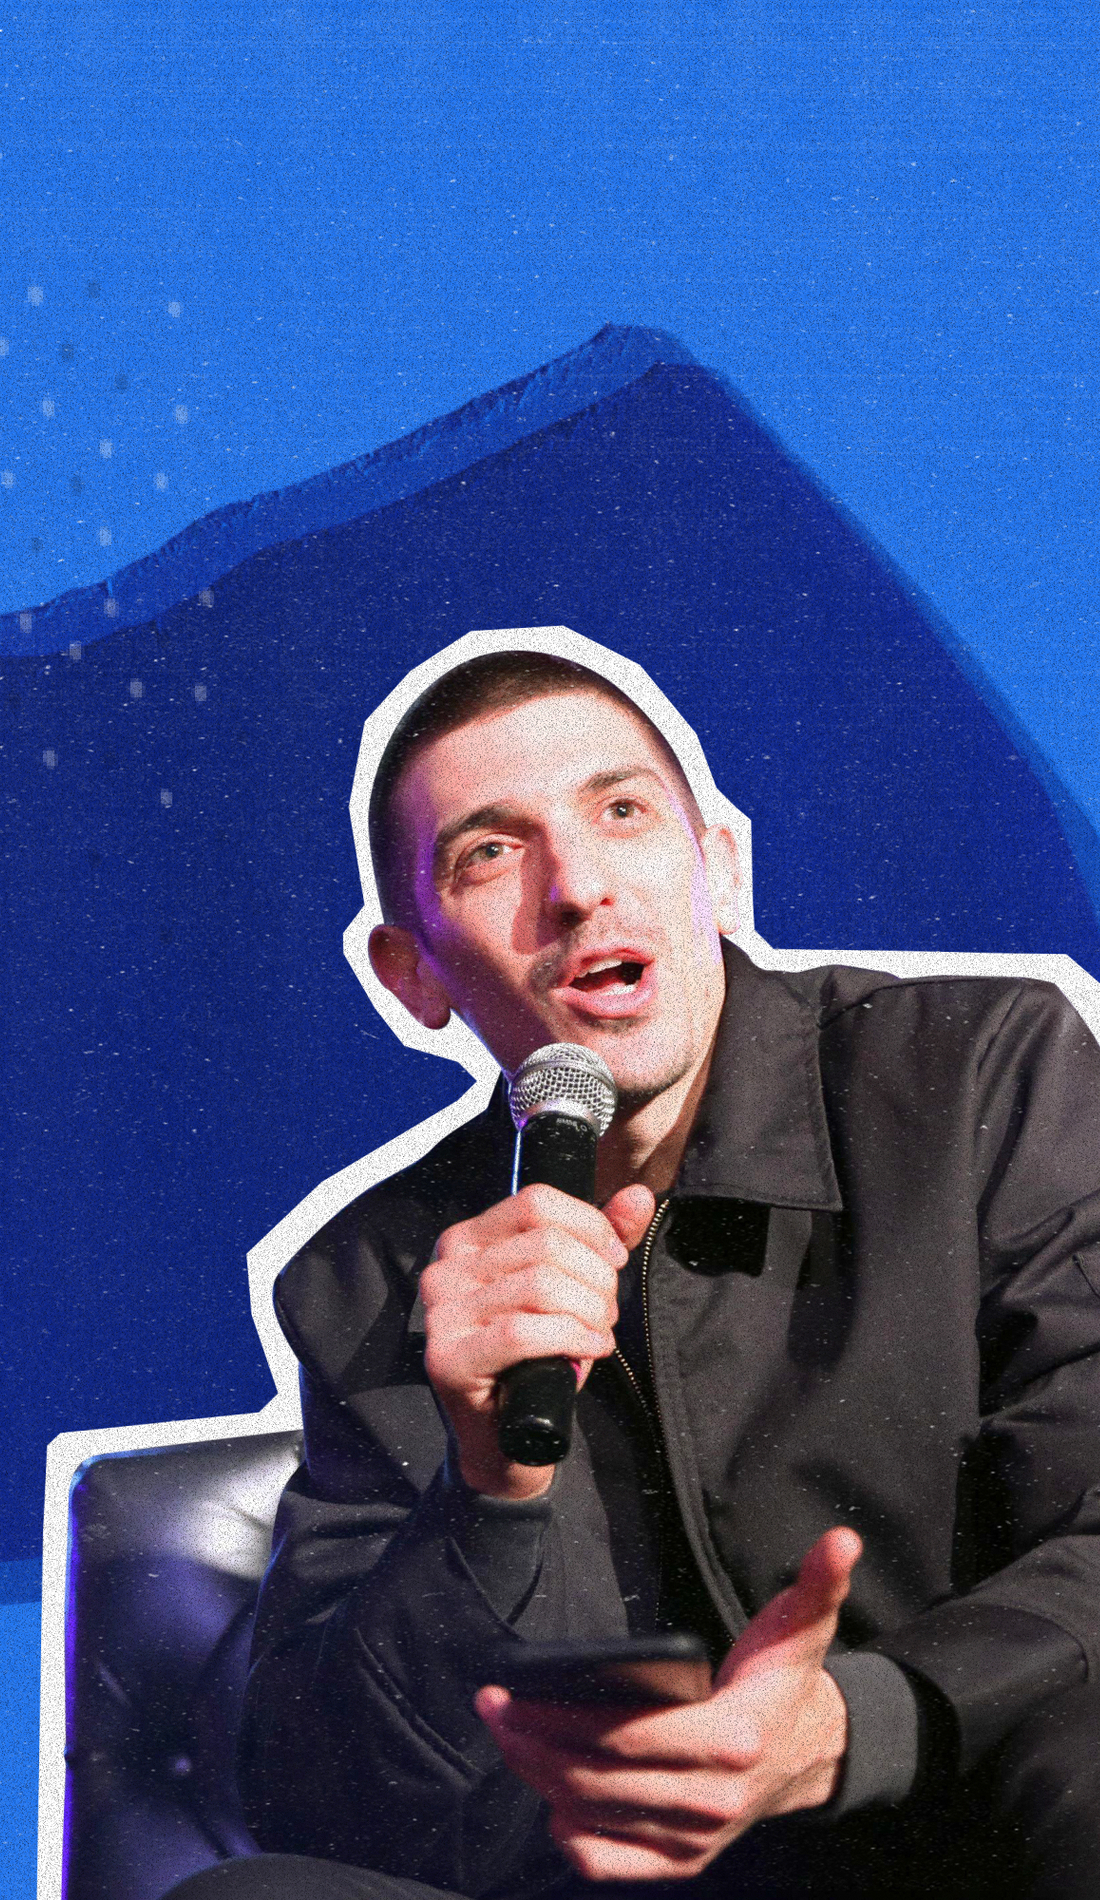 A Andrew Schulz live event